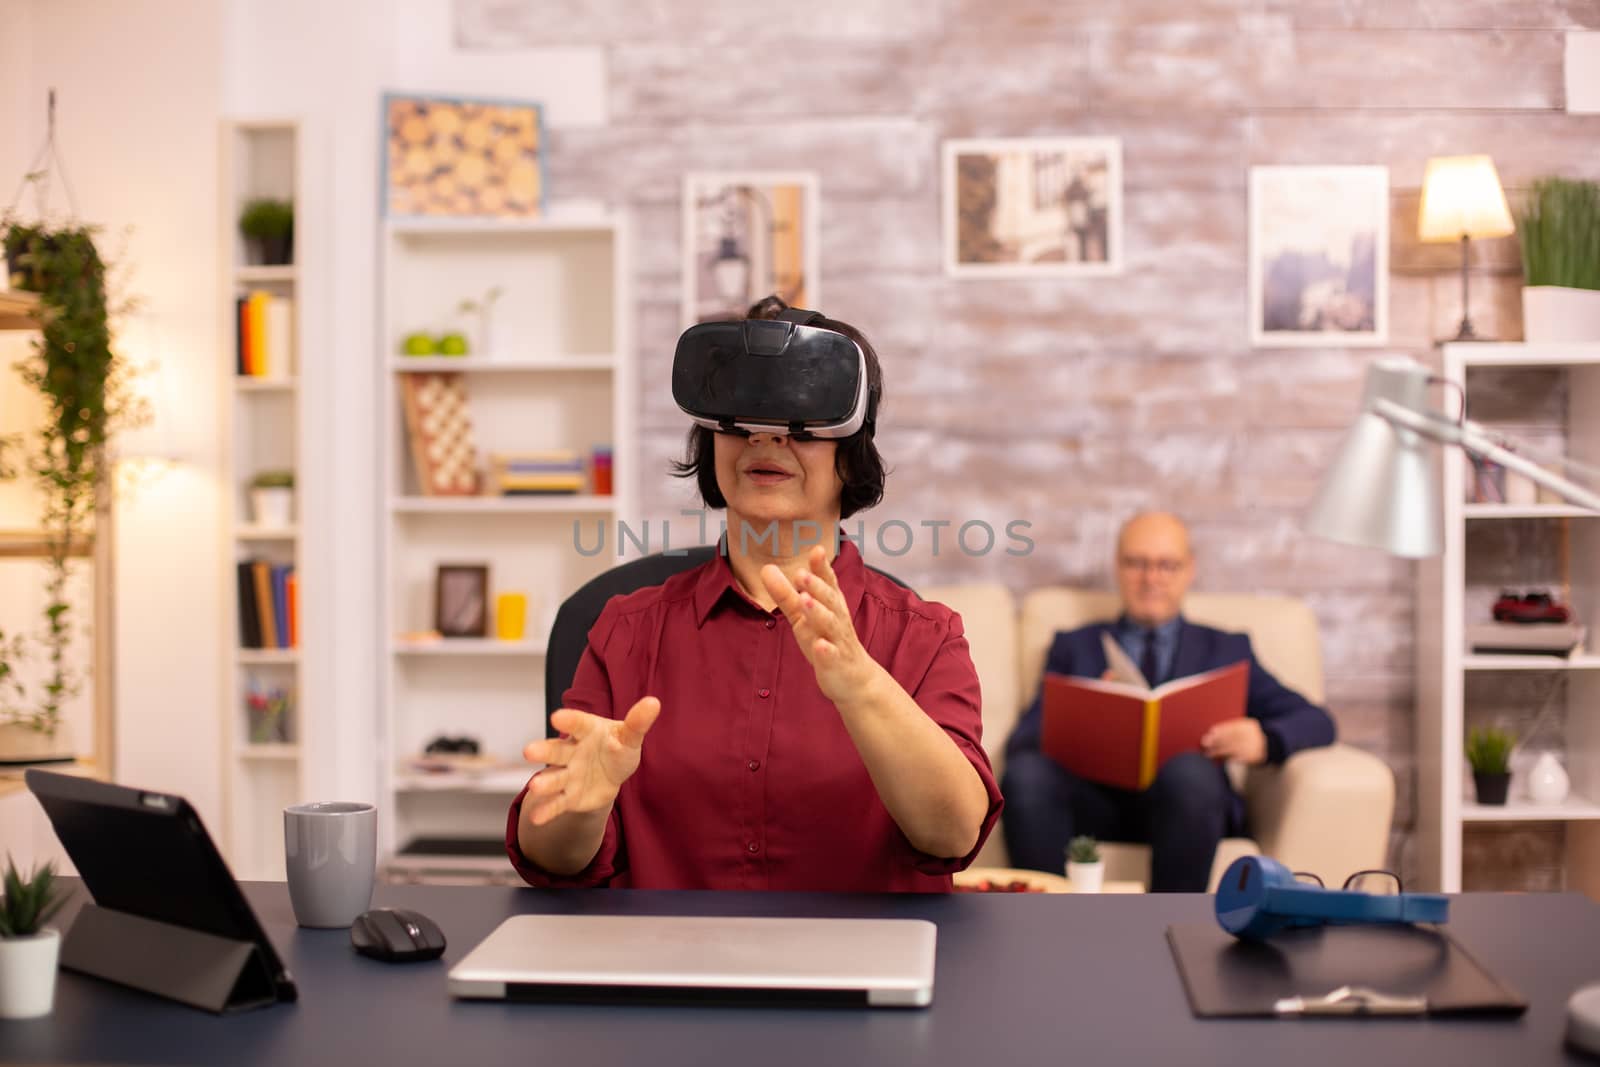 Old elderly woman using a VR virtual reality headset for the first time by DCStudio